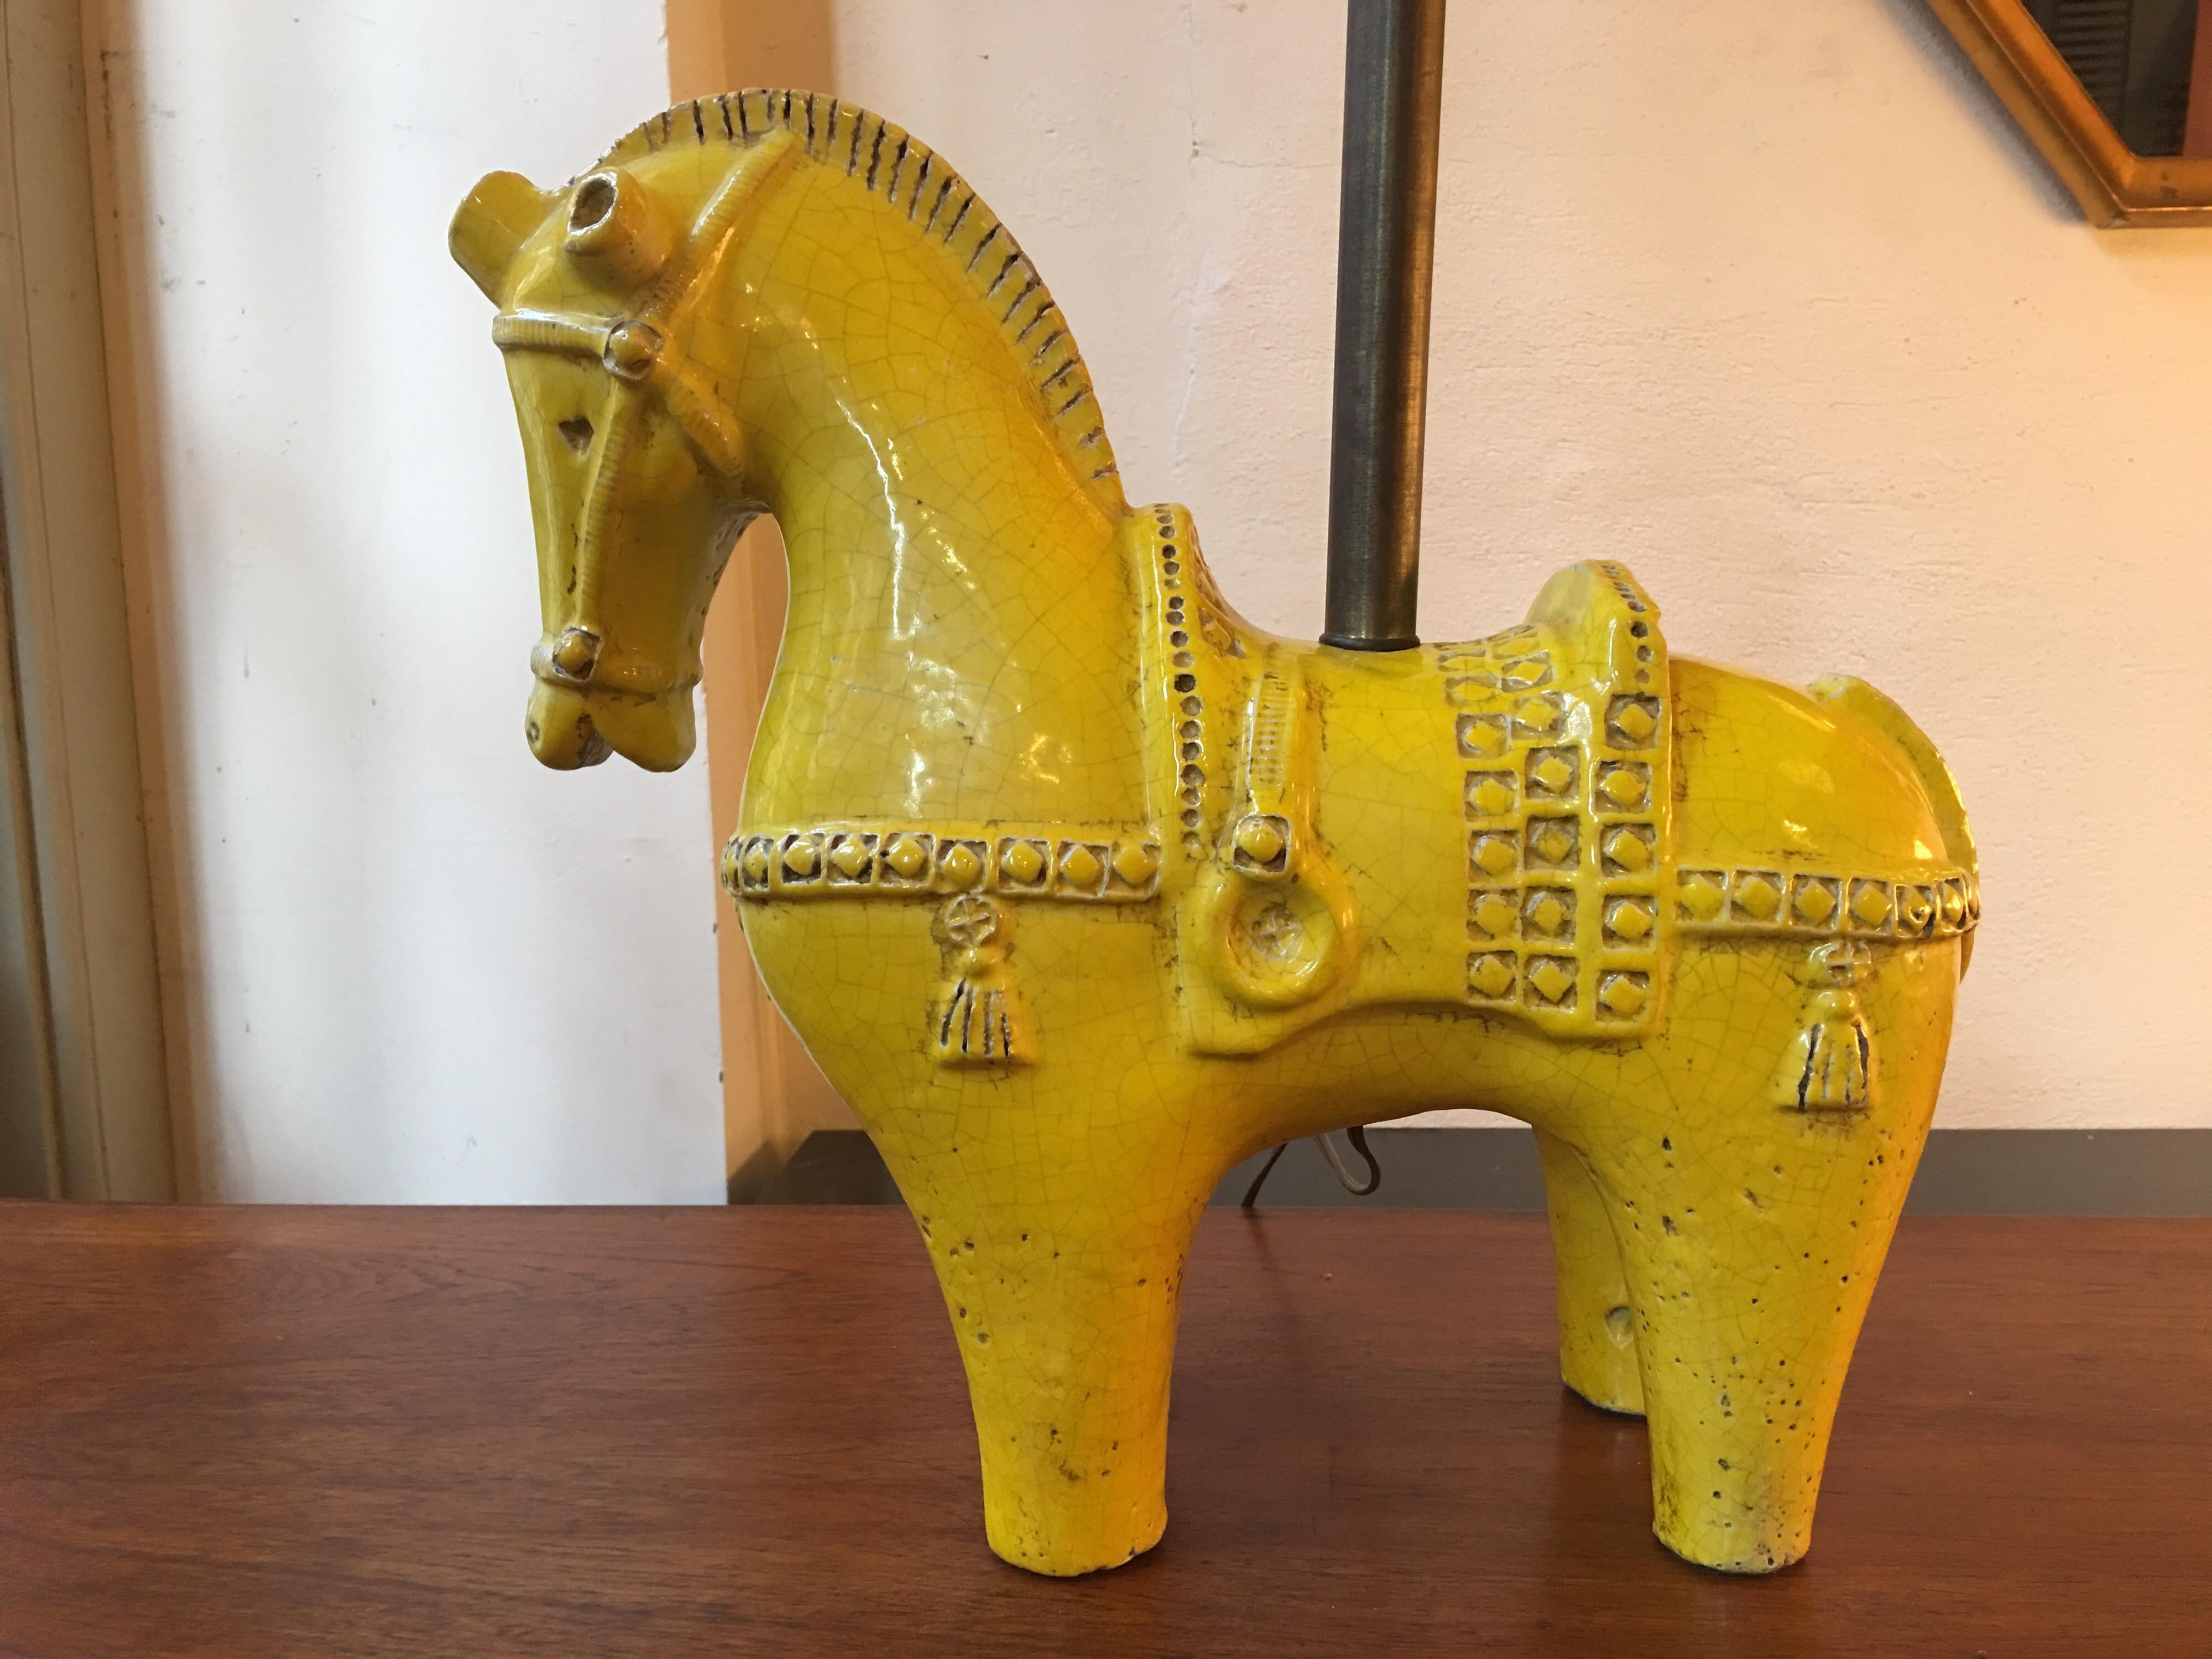 Aldo Londi for Bitossi extra large horse lamp! Beautiful detail and craftmanship to the hand-built horse. Yellow pieces are always a nice surprise where as most are in the deep blue. Measurements below are for Horse alone. Lamp stands 35.5